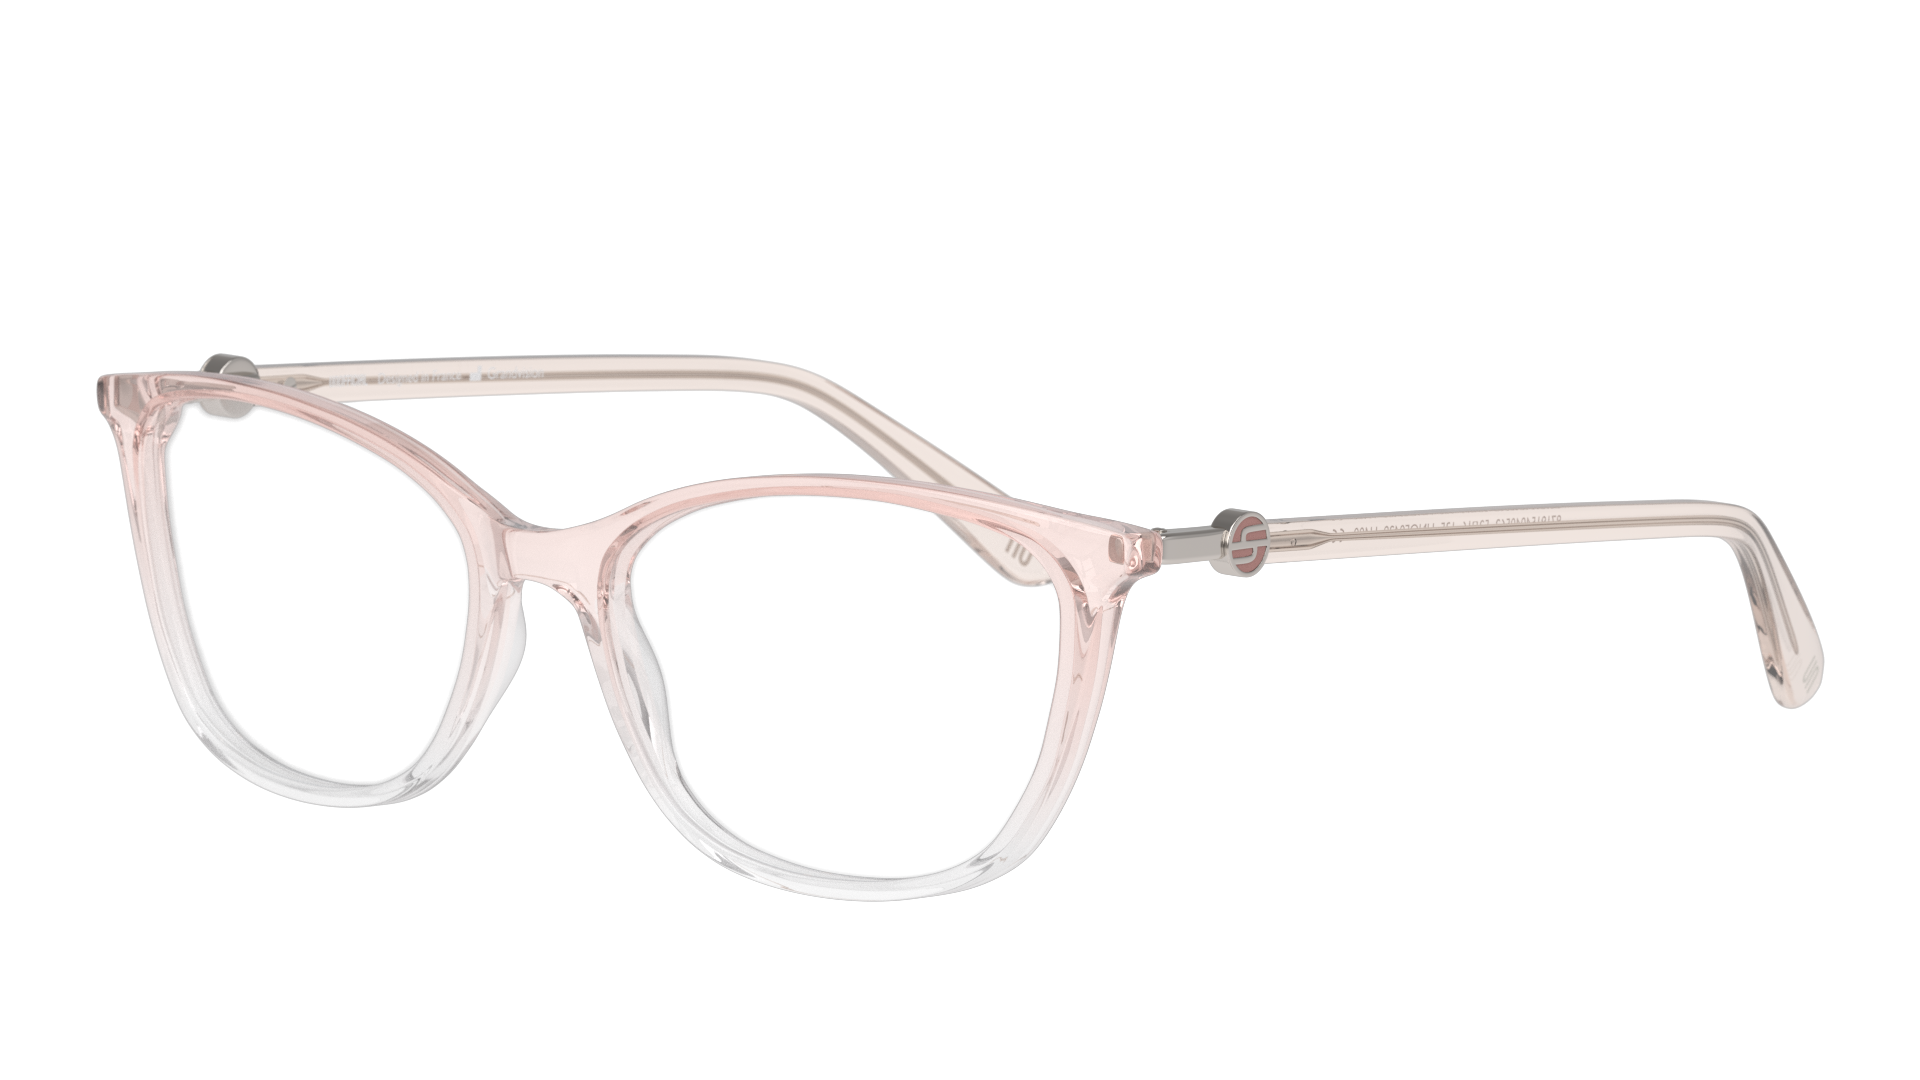 Angle_Left01 Unofficial UNOF0429 (PX00) Glasses Transparent / Pink